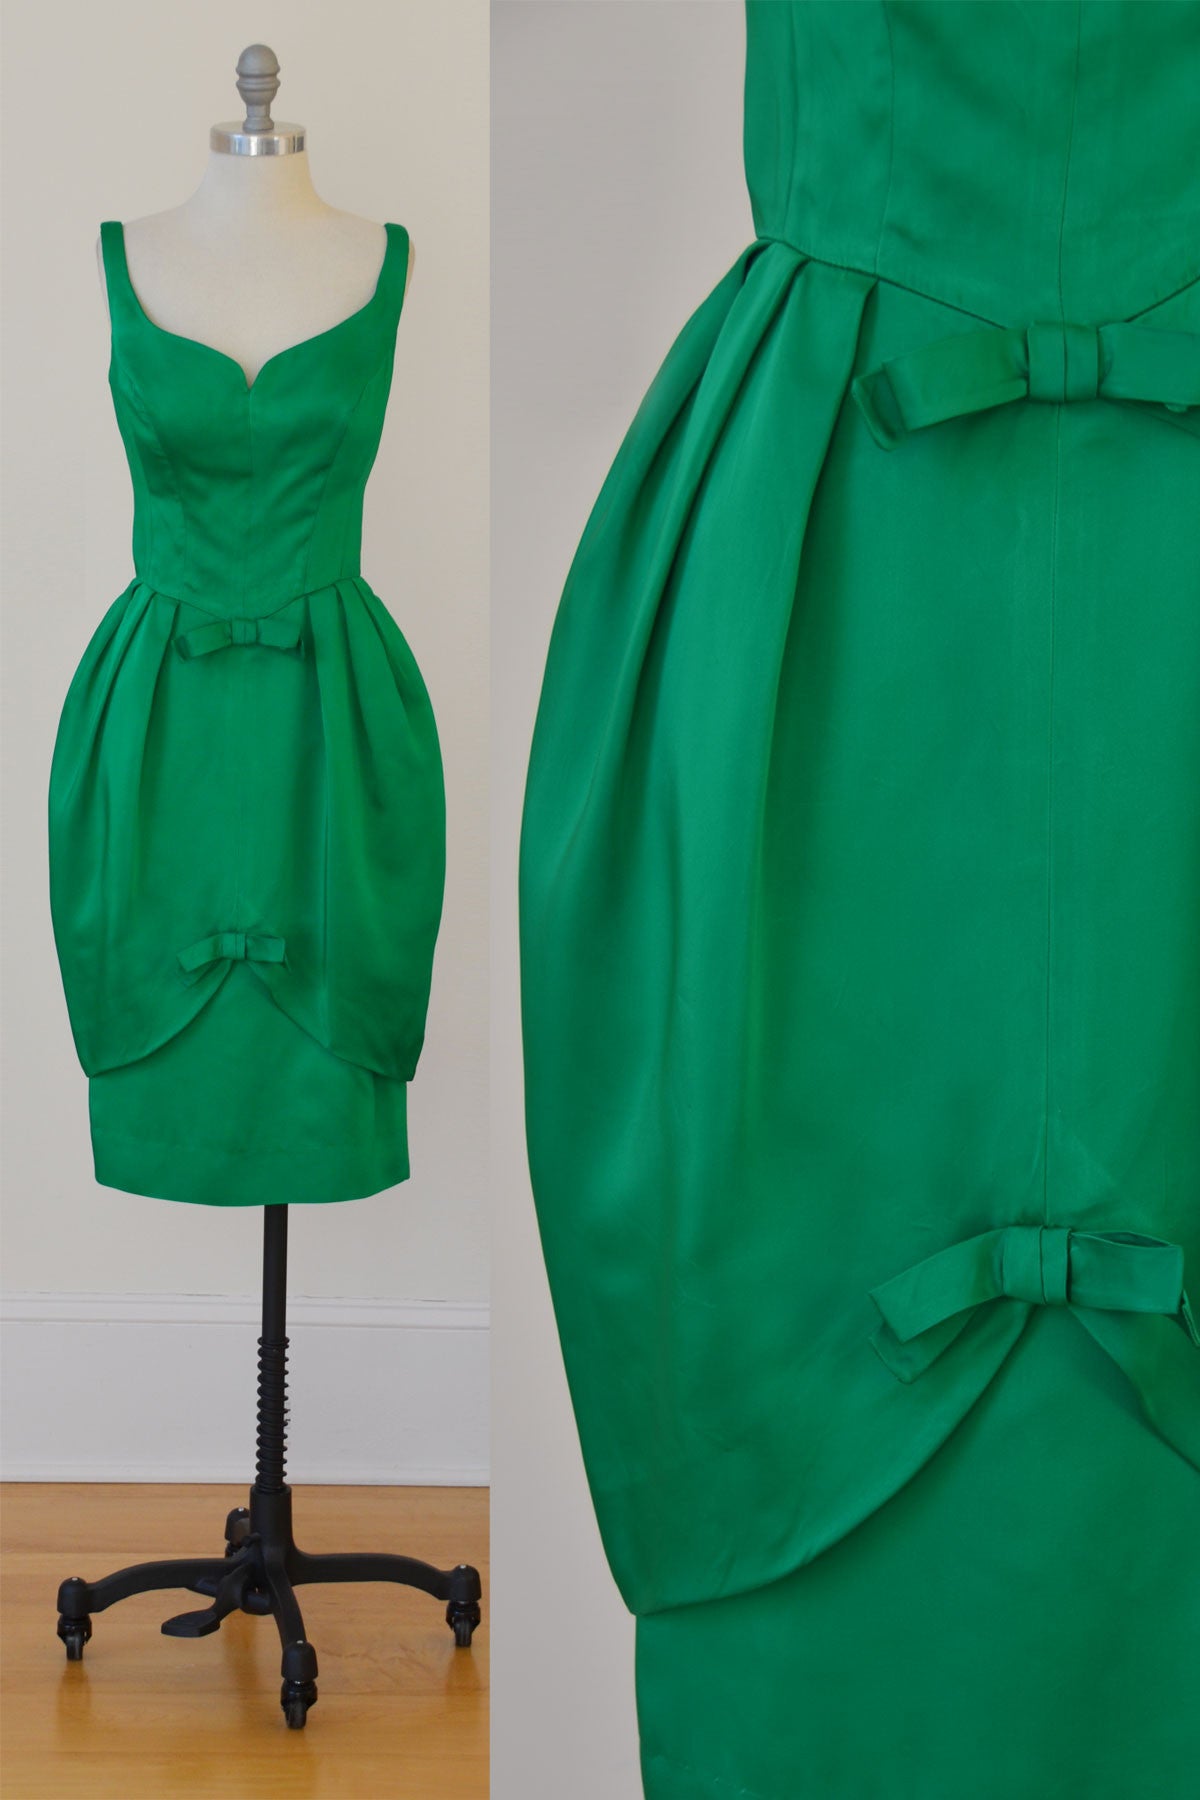 1960's Emerald Green Satin Bombshell Vintage Party Dress with Petal Skirt